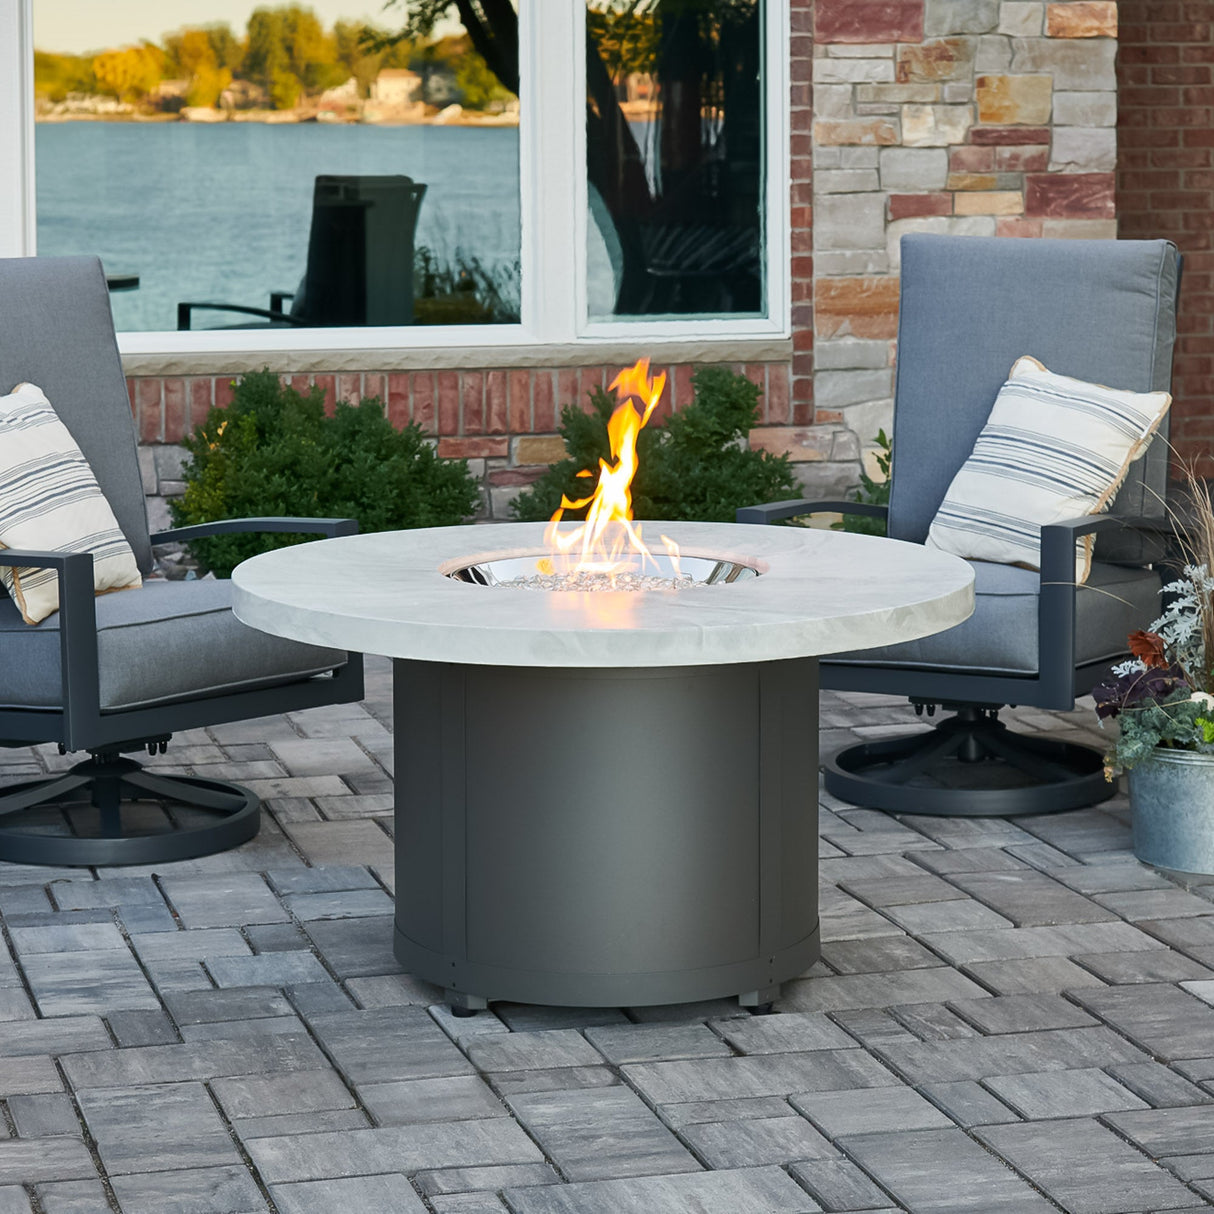 The White Onyx Beacon Round Gas Fire Pit Table outside in a patio setting